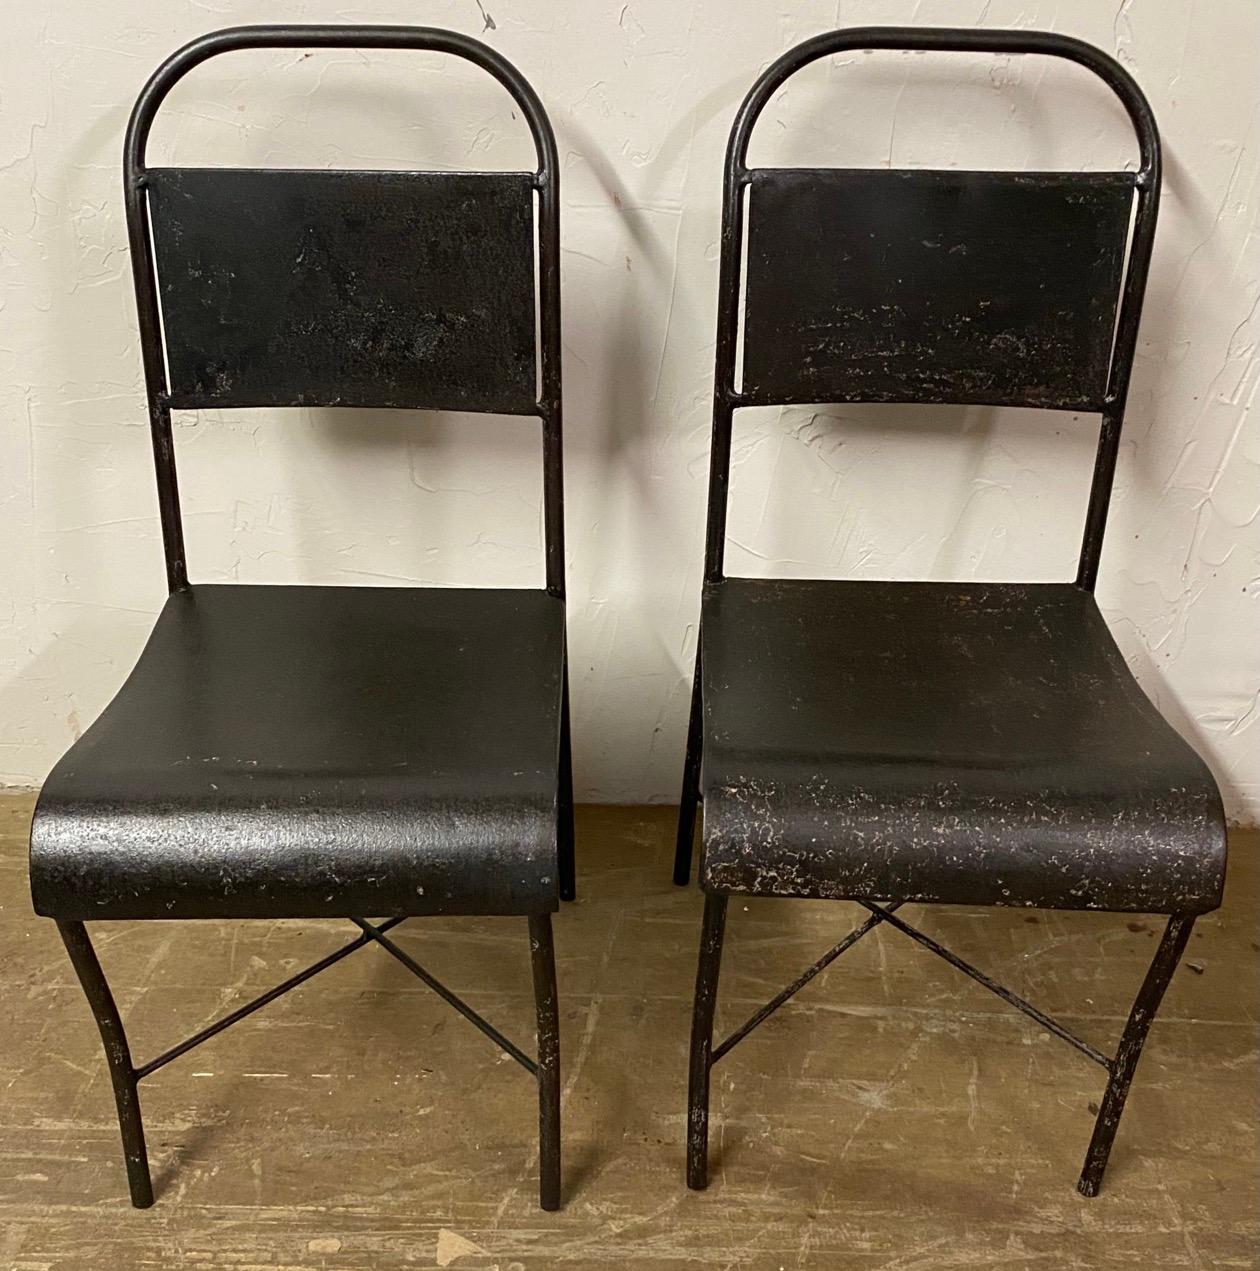 Pair of metal back and seat chairs with tubular frames. These Industrial chairs have taken on a truly special patina. The chairs would work well for both indoor and outdoor dining, and would add great character to an office as desk chairs.
Tolix